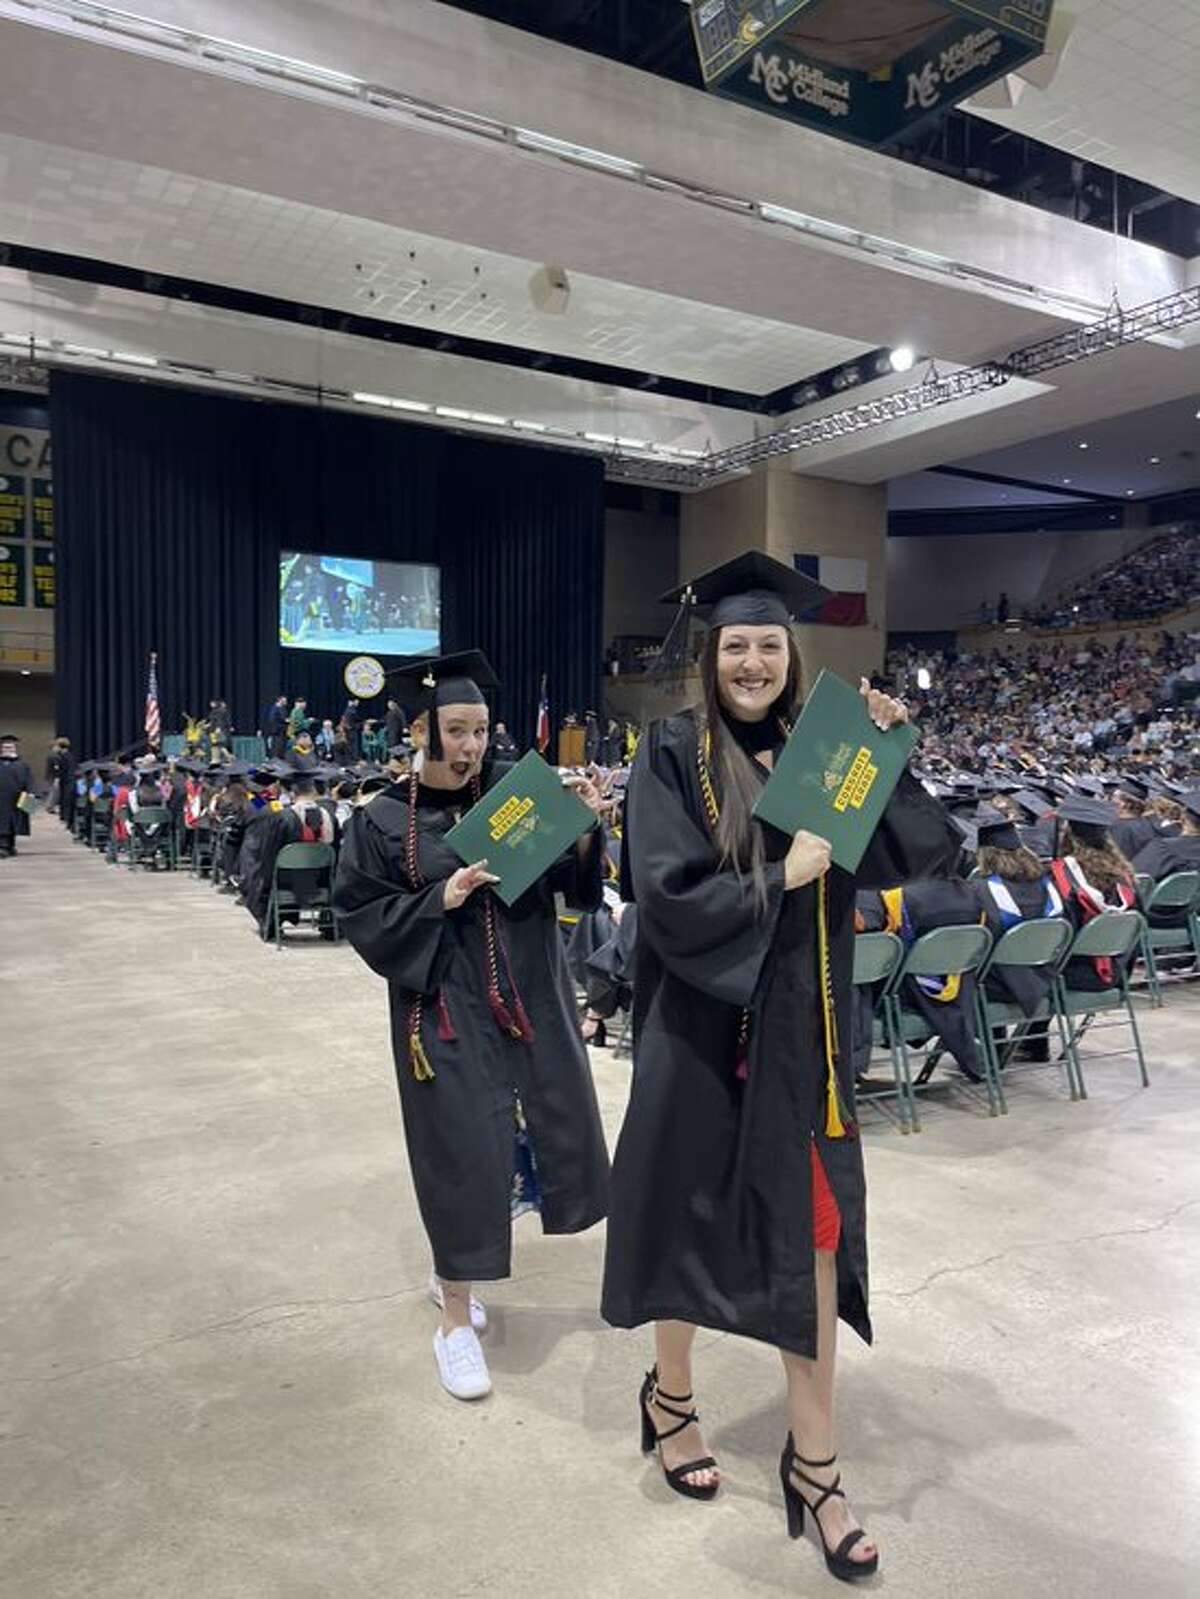 Midland College graduation that took place last week at Chap Center